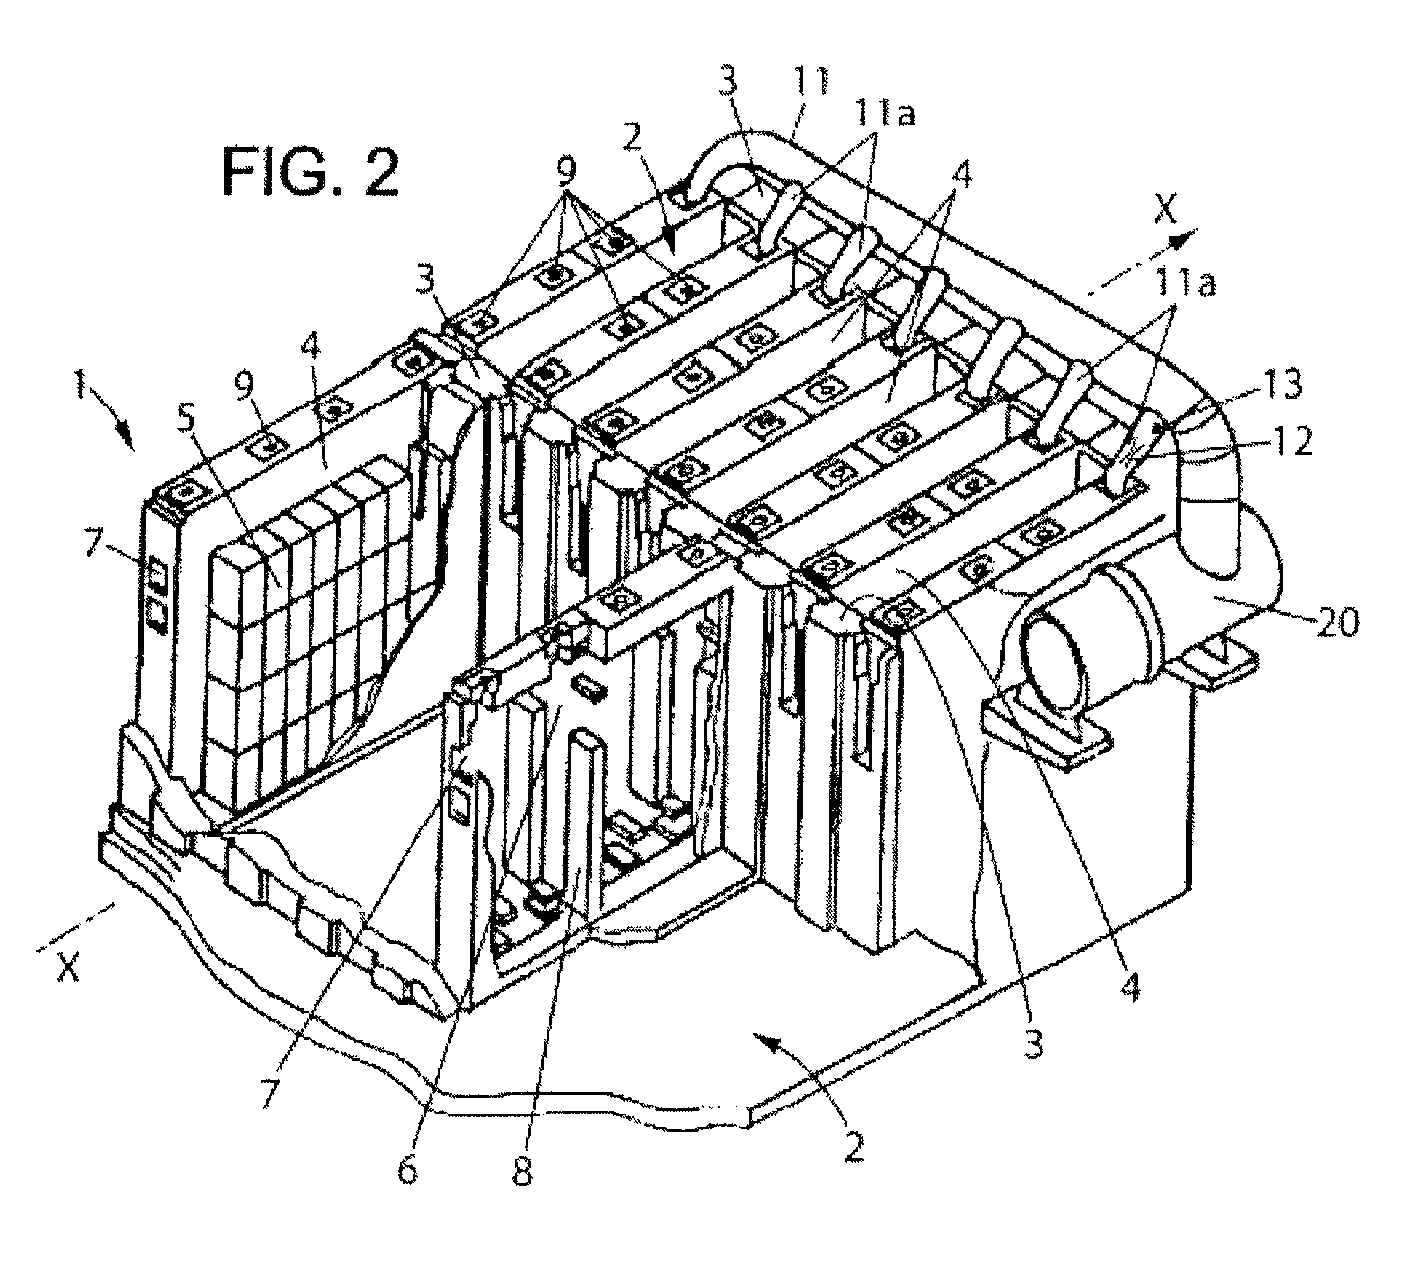 Method of monitoring an exhaust fumes main linking a carbon block baking furnace to a fume treatment